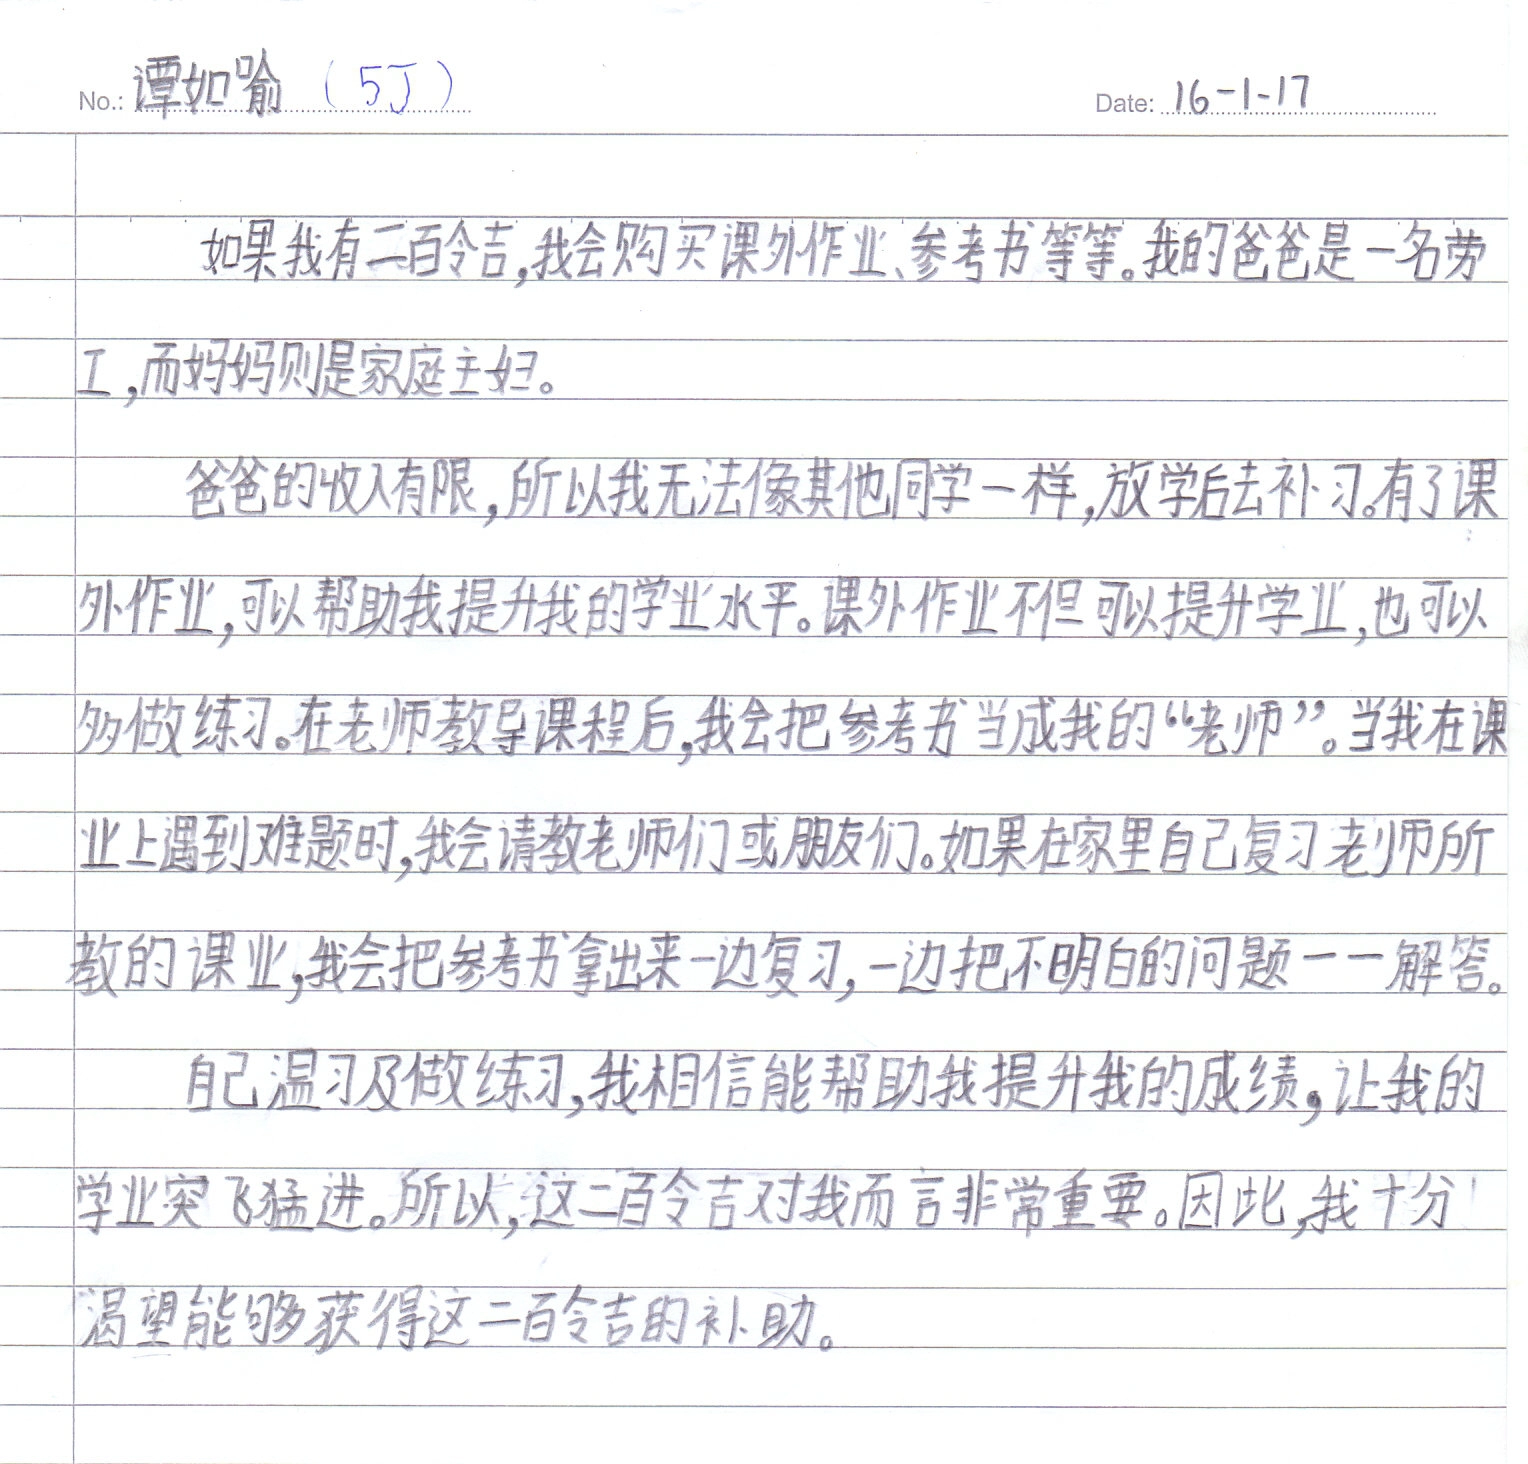 Thank you letters from students of SJK(C) Chung Kwok ! 中国公小学生的感恩信 !